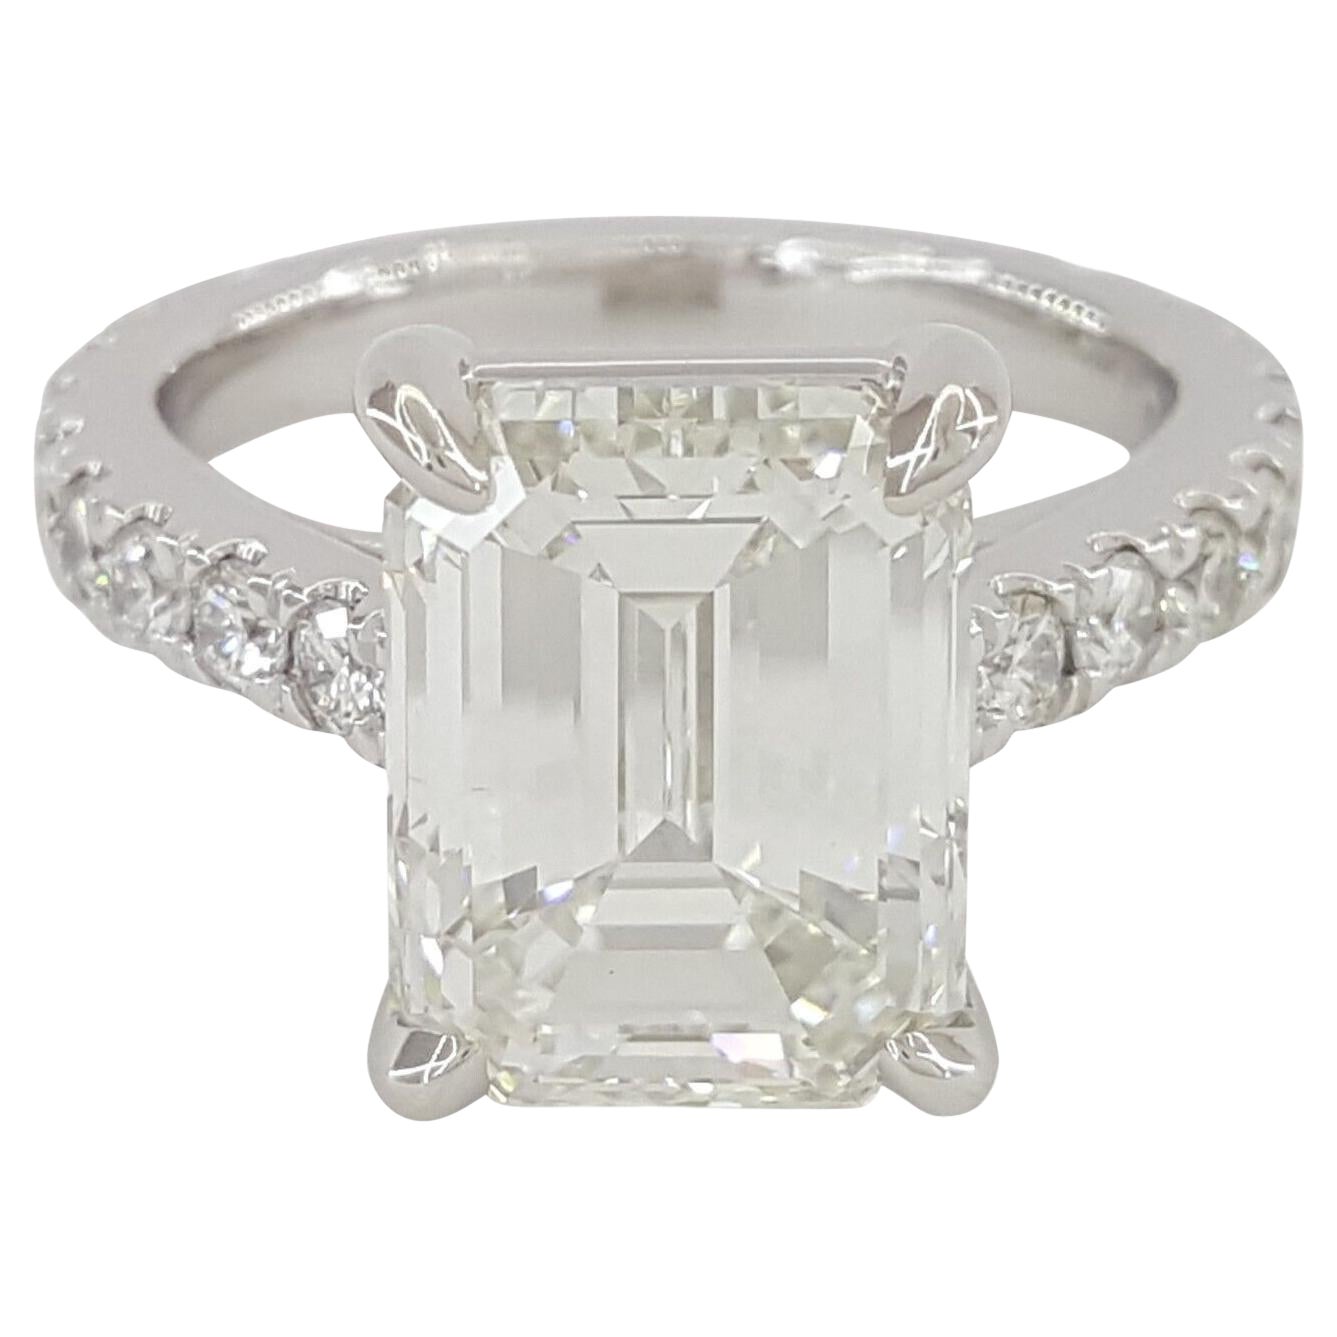 GIA Certified 4 Carat Emerald Cut Diamond Solitaire Ring with pavè